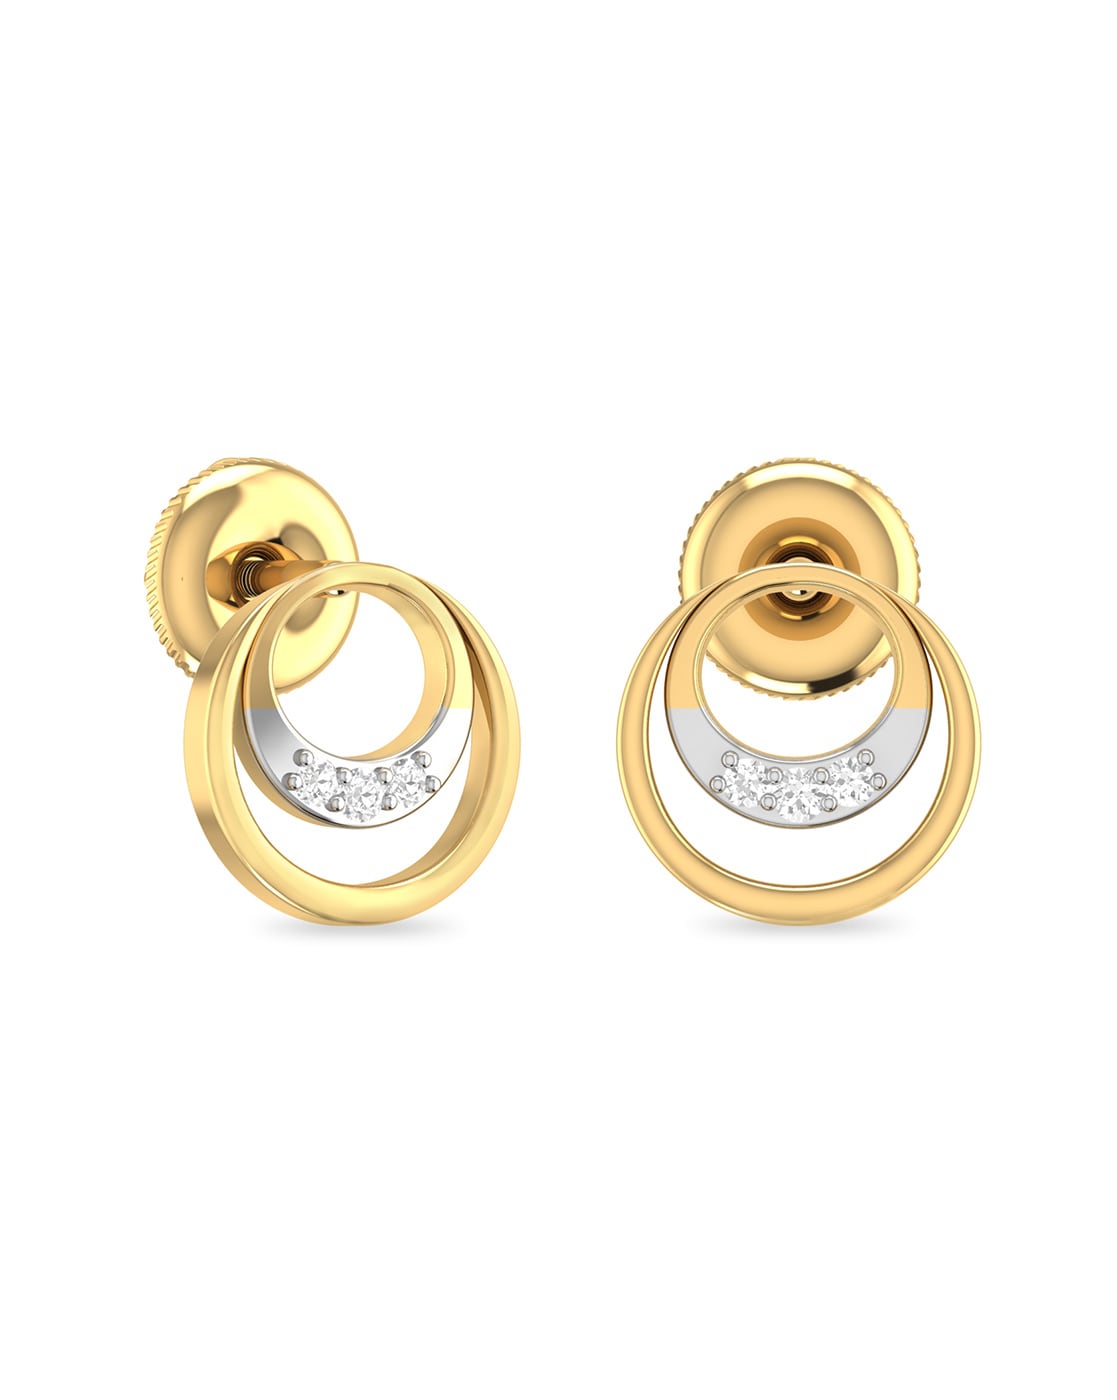 The Cairbre Diamond Earrings by PC Jeweller